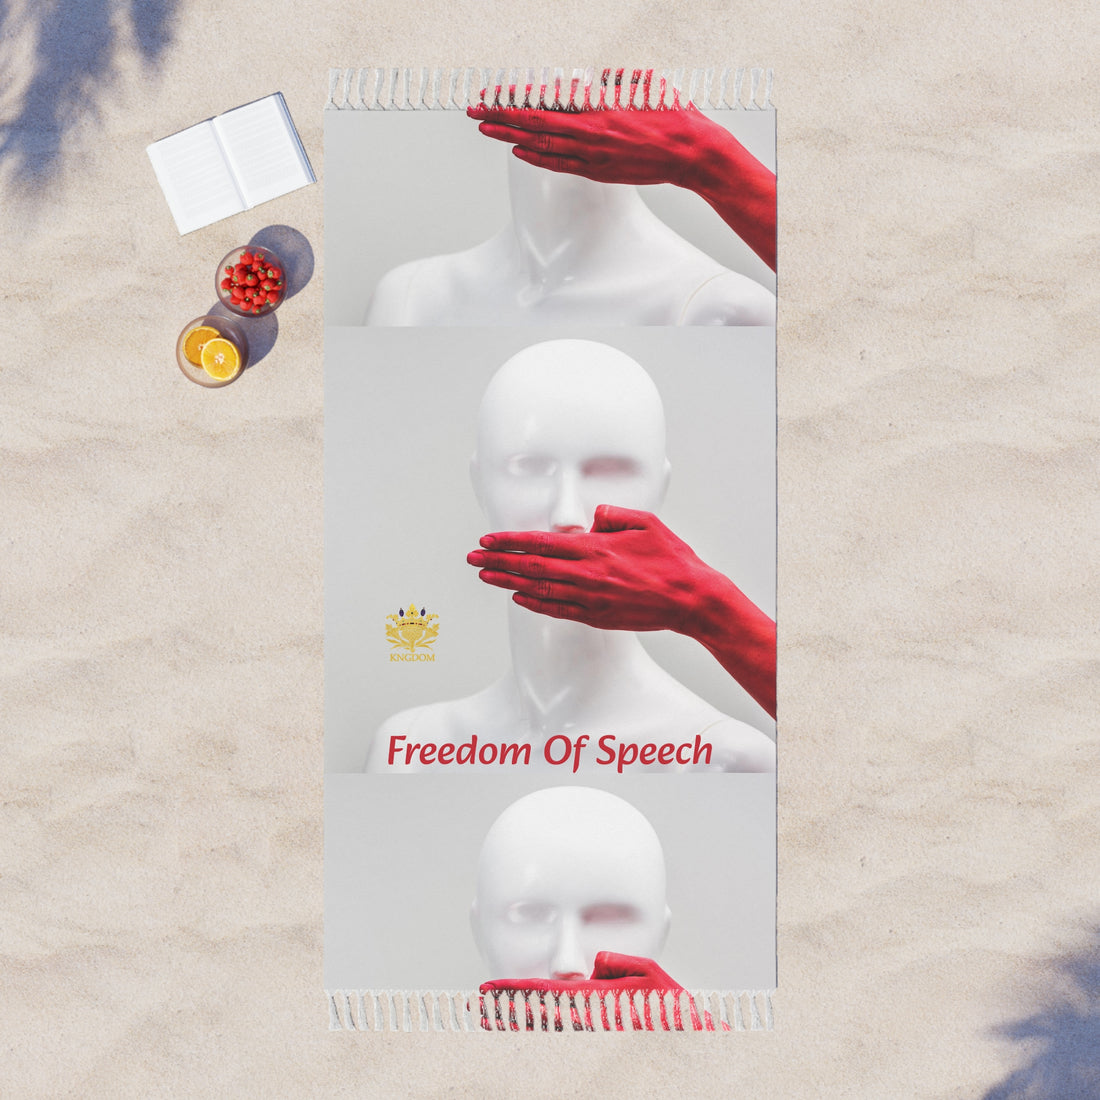 WE ARE AMERICA &quot;Freedom Of Speech&quot;- (THE BLOOD OF THE MARTYRS- Red Hand Covering Mouth) Boho Beach Cloth W/ Kngdom Logo